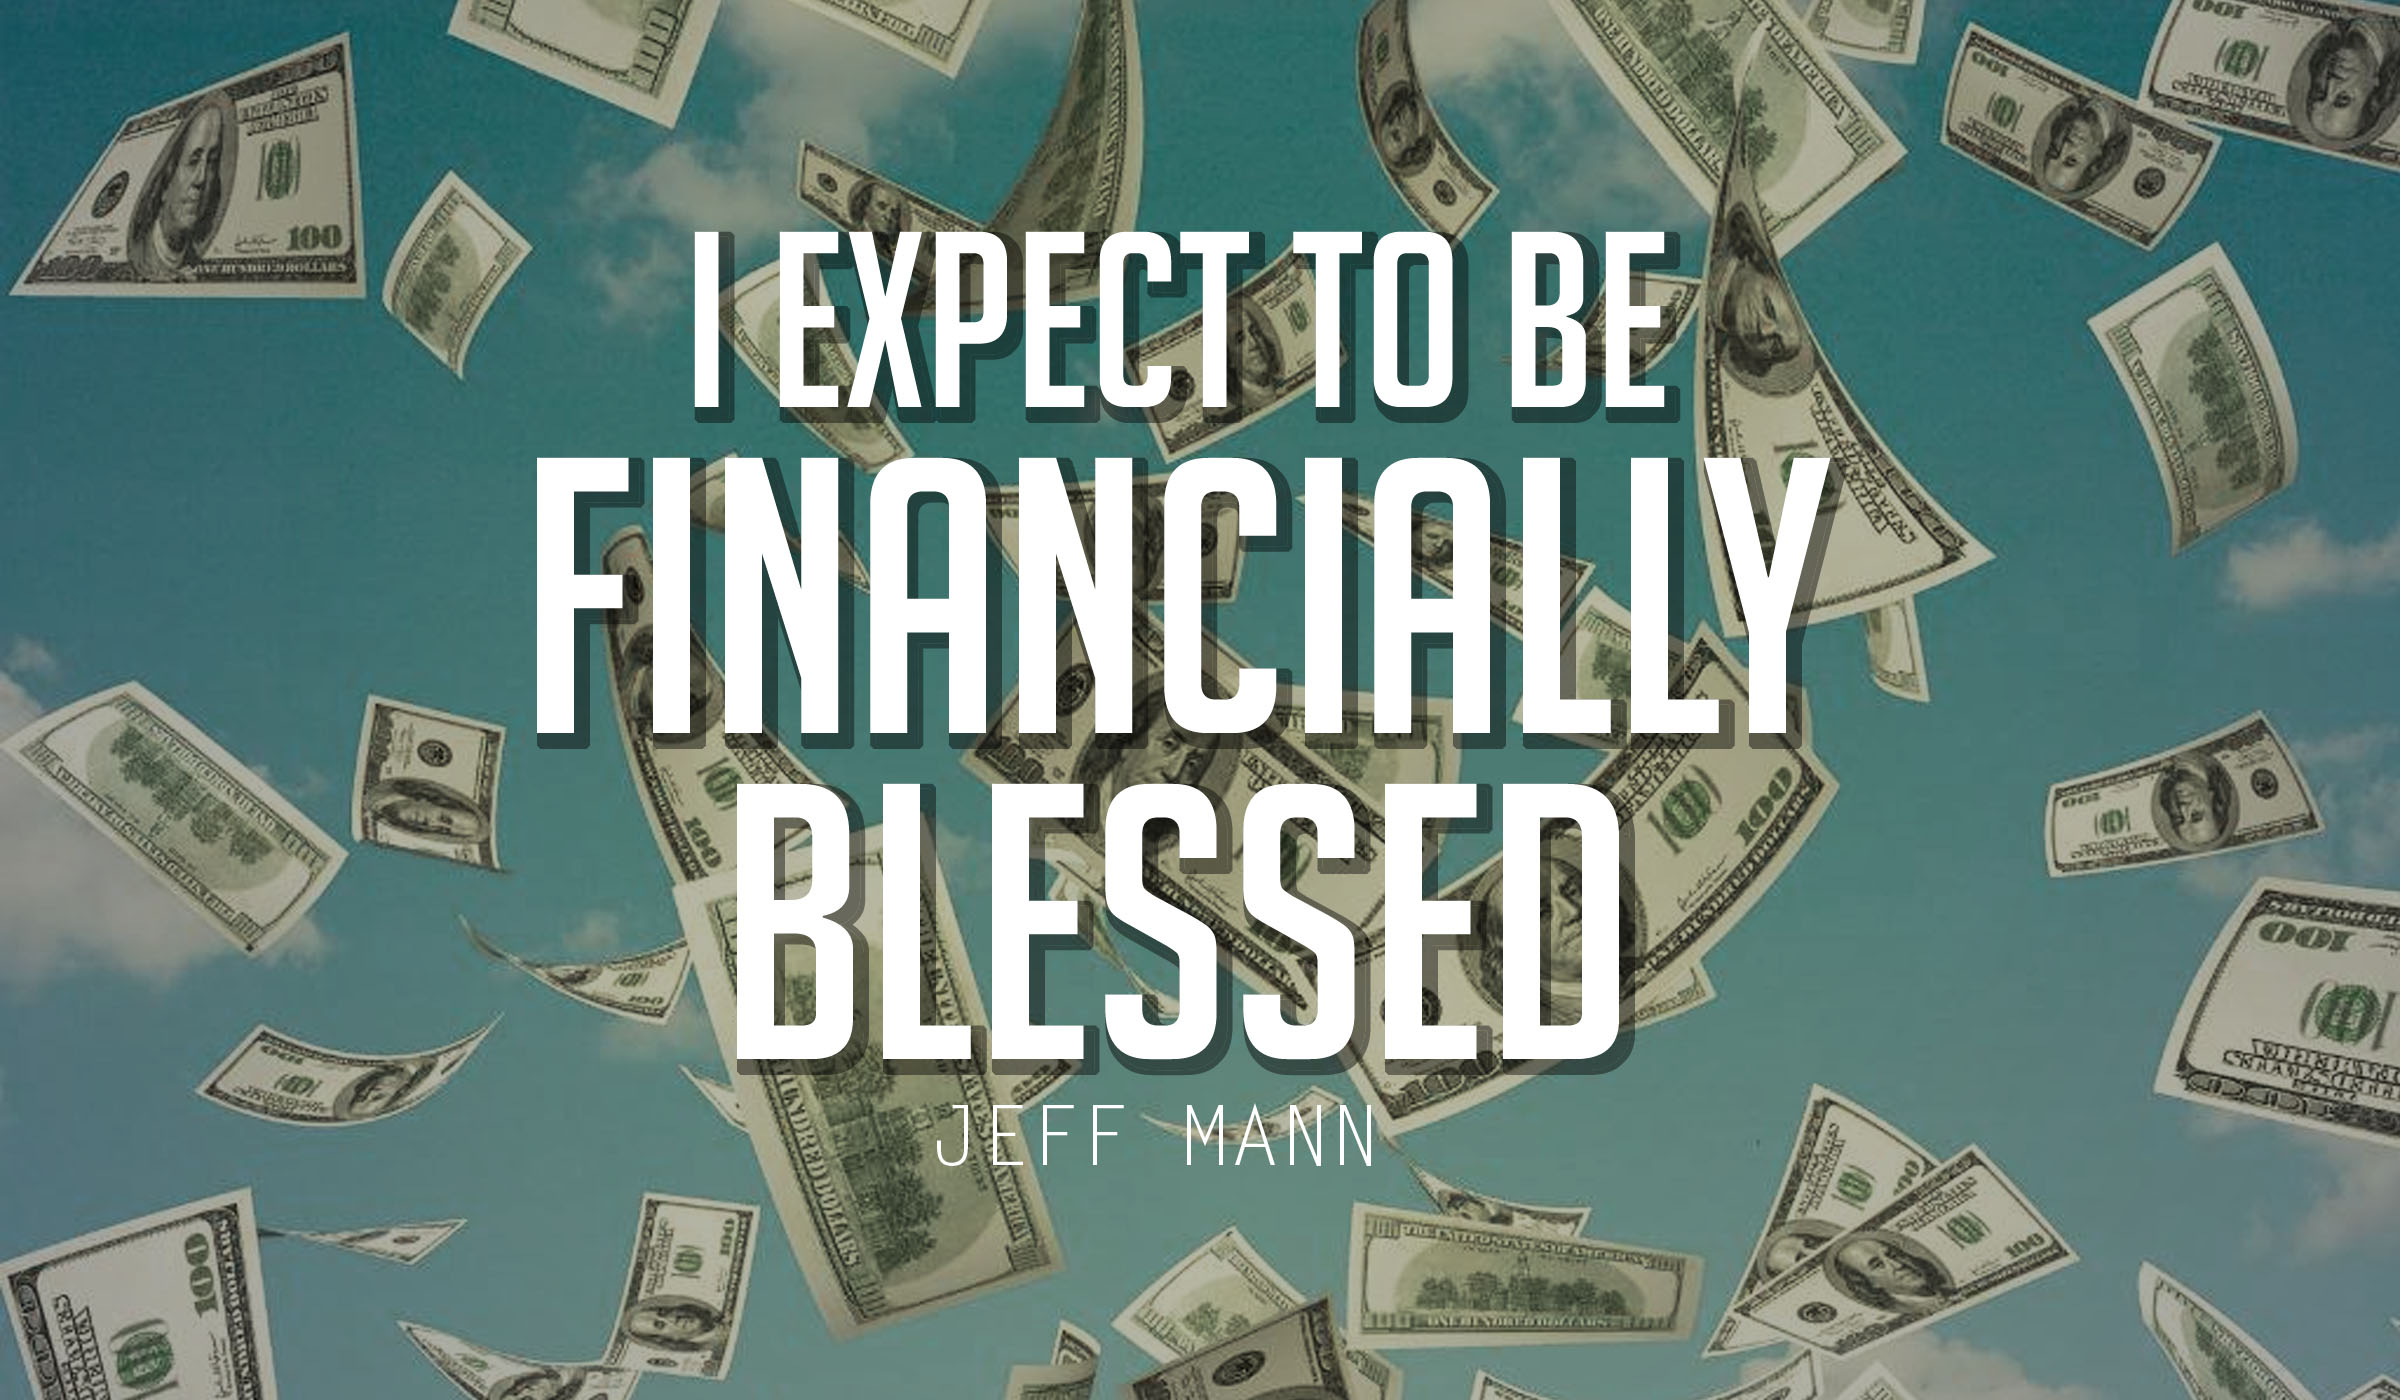 I Expect To Be Financially Blessed